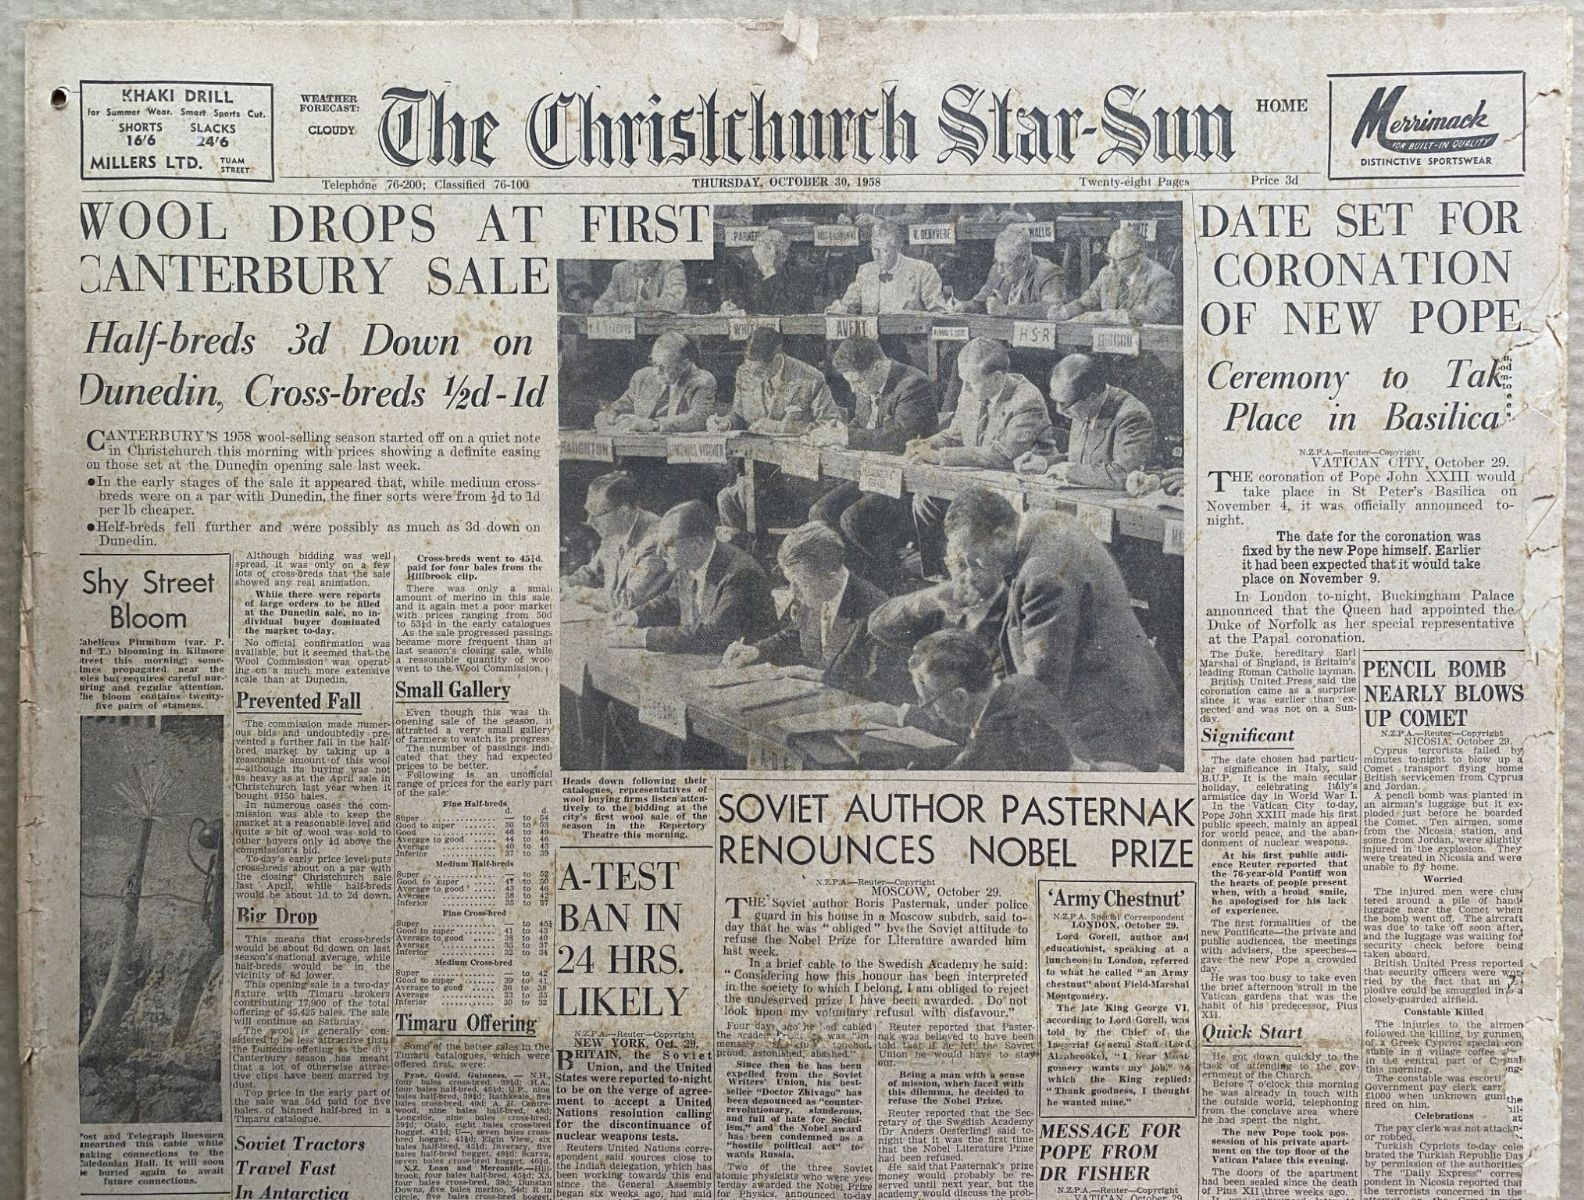 OLD NEWSPAPER: The Christchurch Star-Sun, 30 October 1958 - Wool prices drop